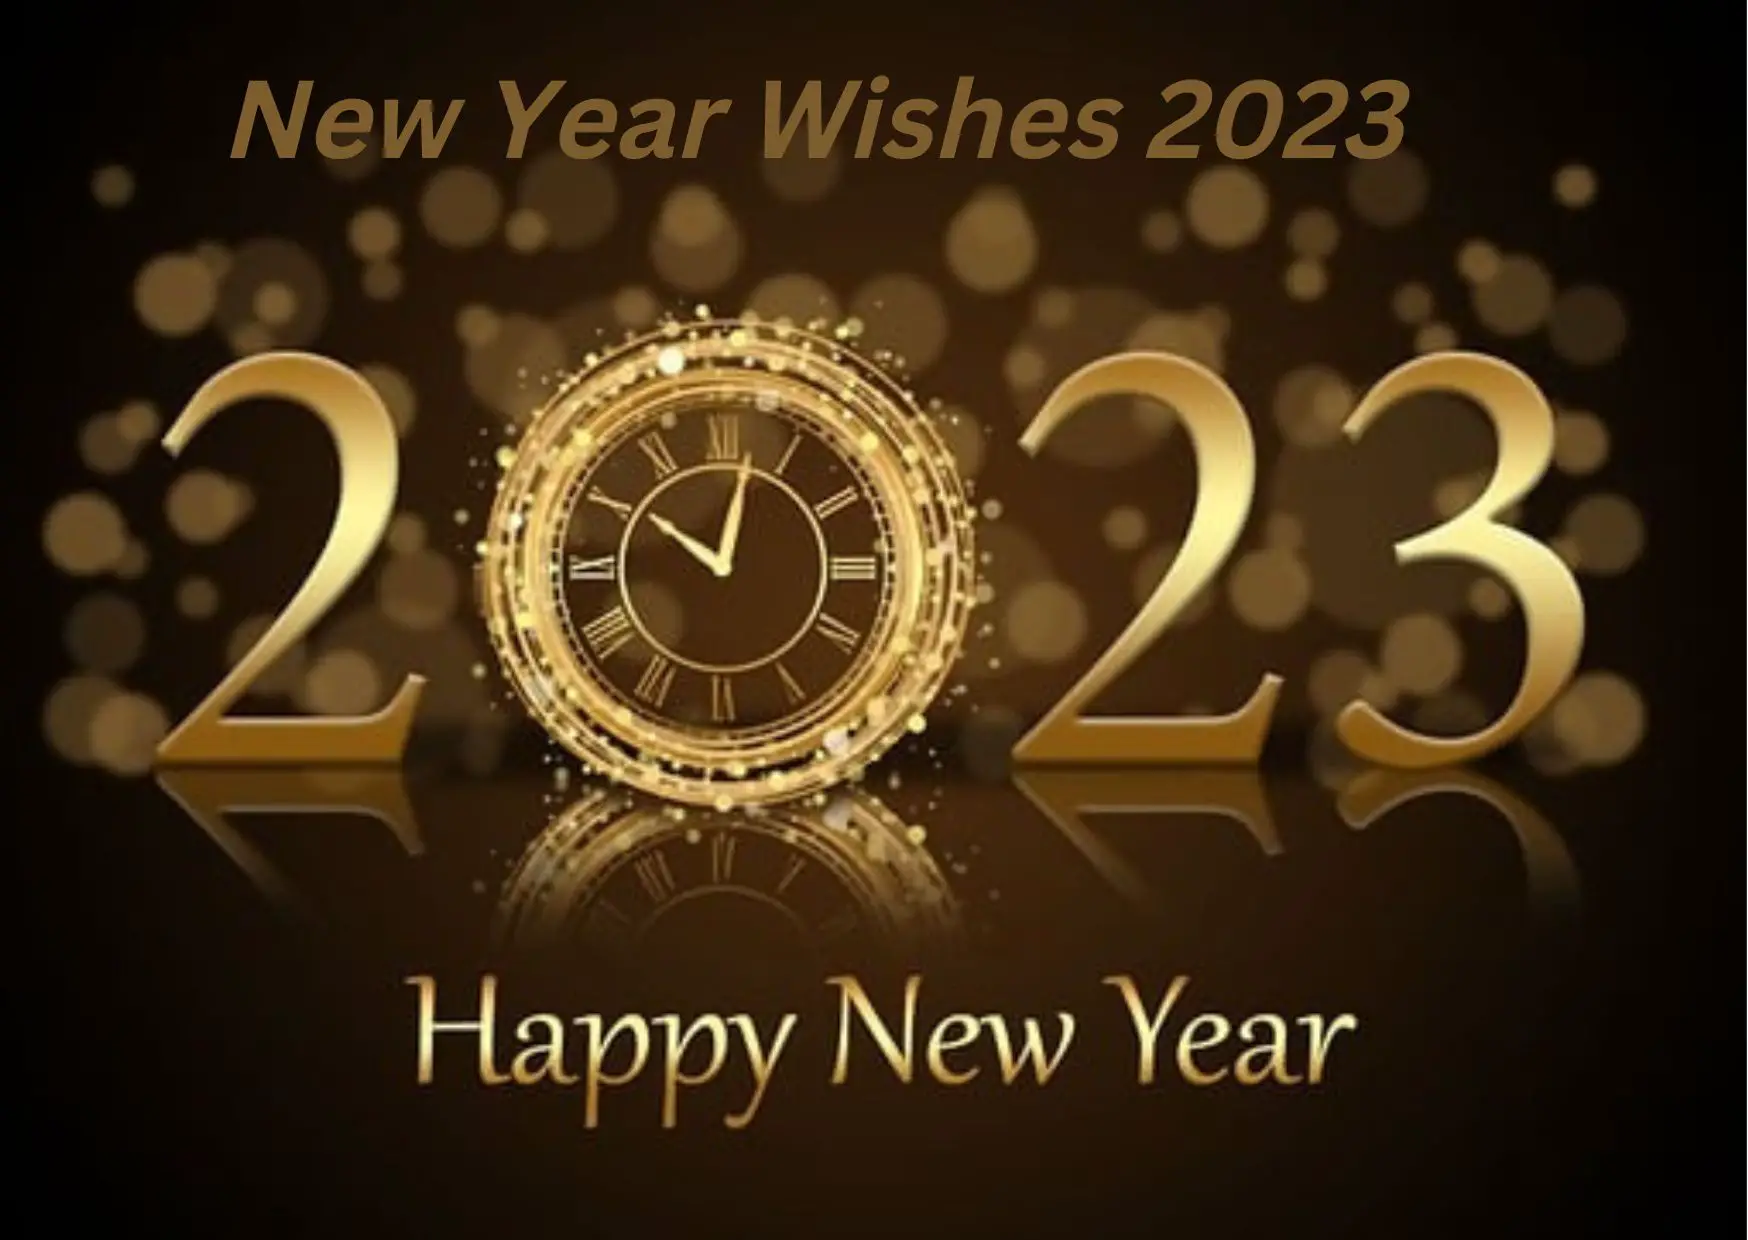 100 Best New Year Wishes 2023-New Year Wishes for Friends